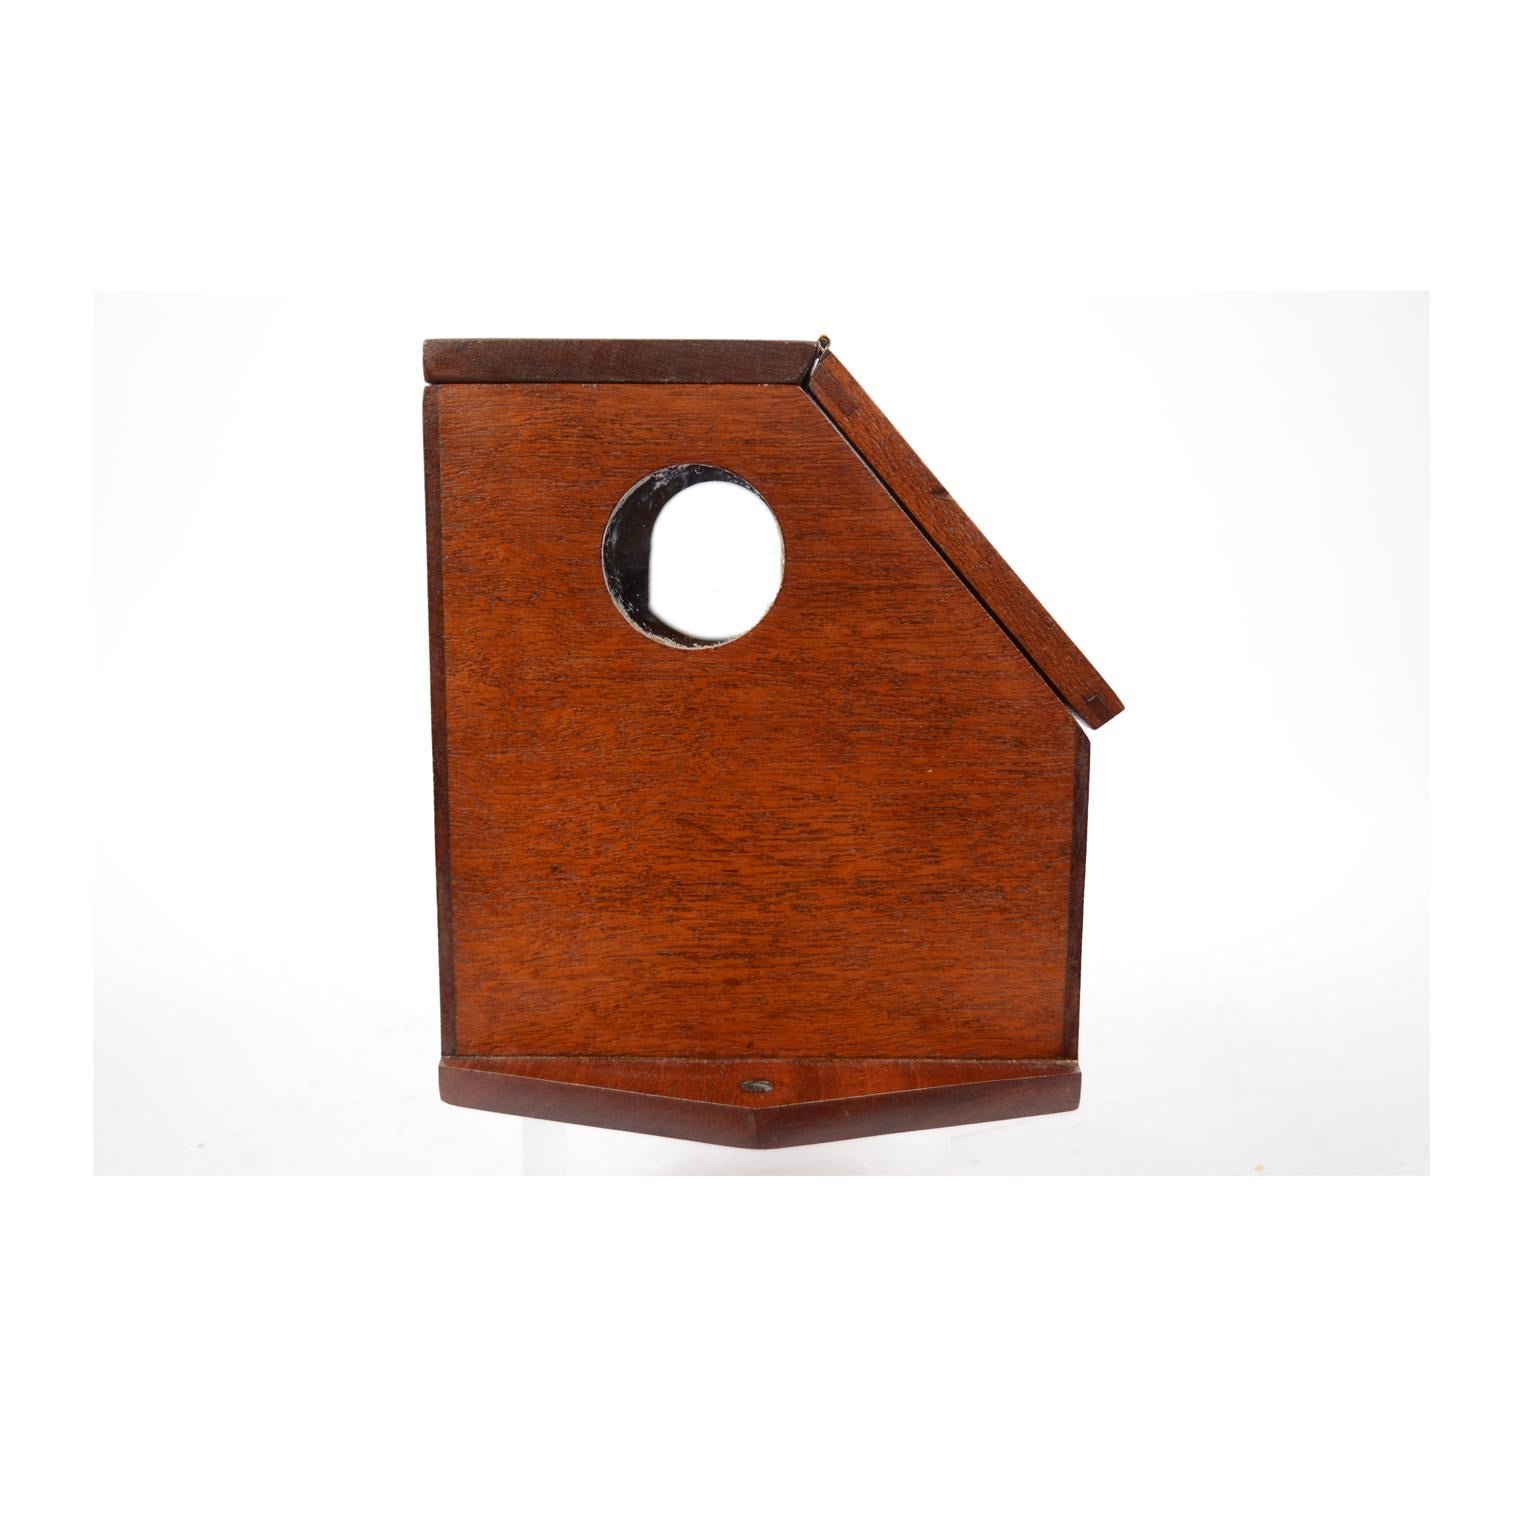 Late 19th Century American Mahogany Wood Antique Magnetic Binnacle Nautical Compass, circa 1896 For Sale